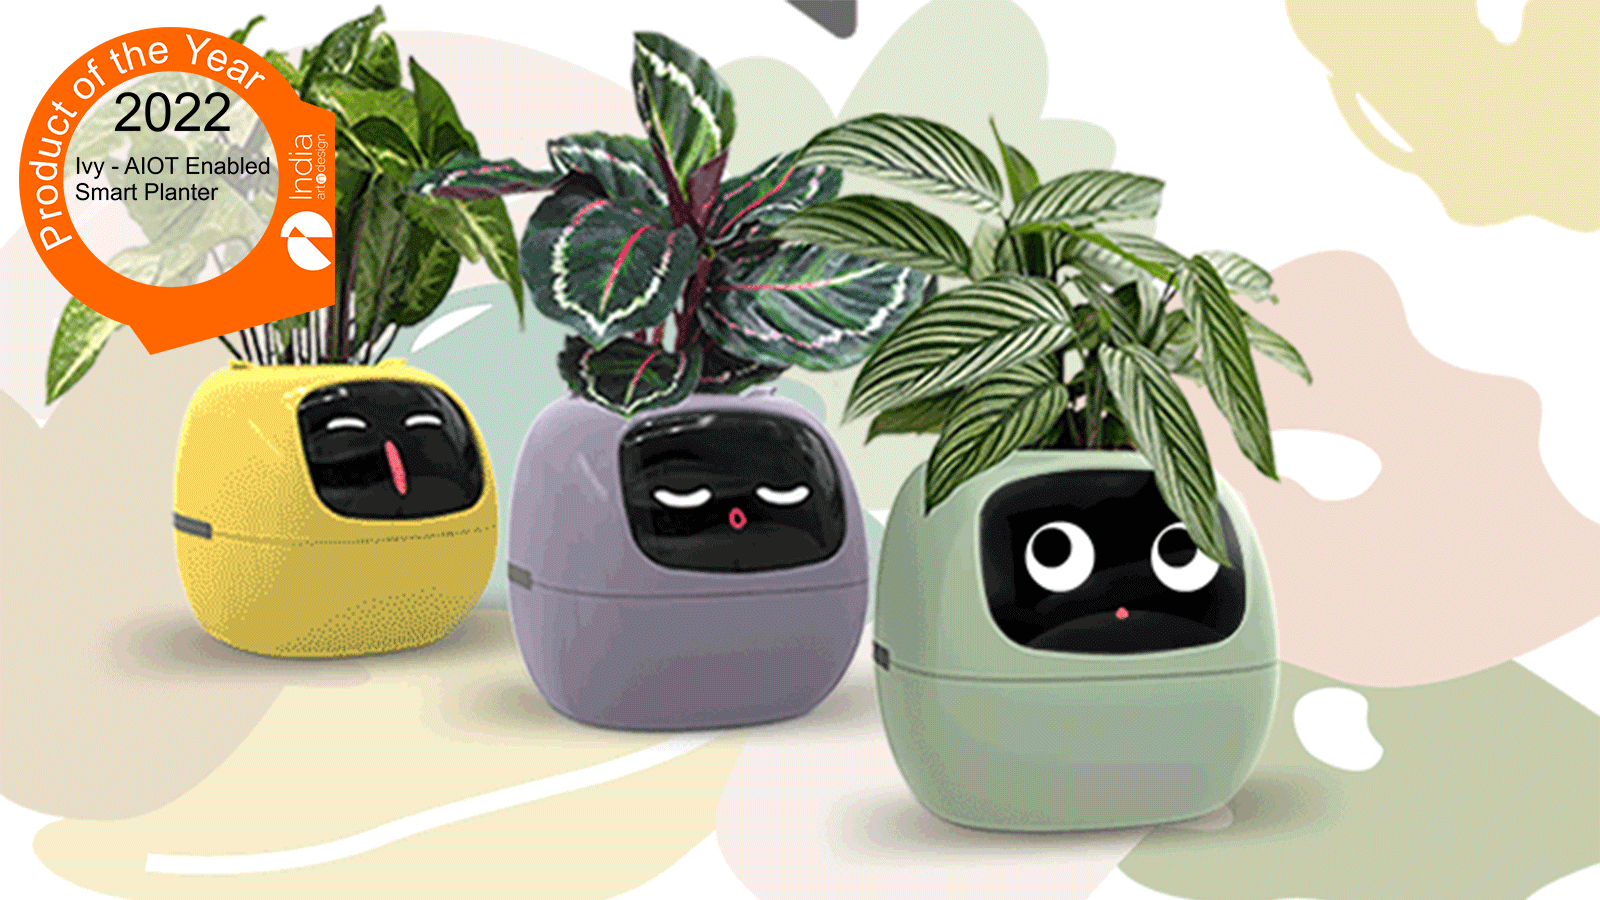 "Product 2022 Ivy smart planter AIOT indiaartndesign"